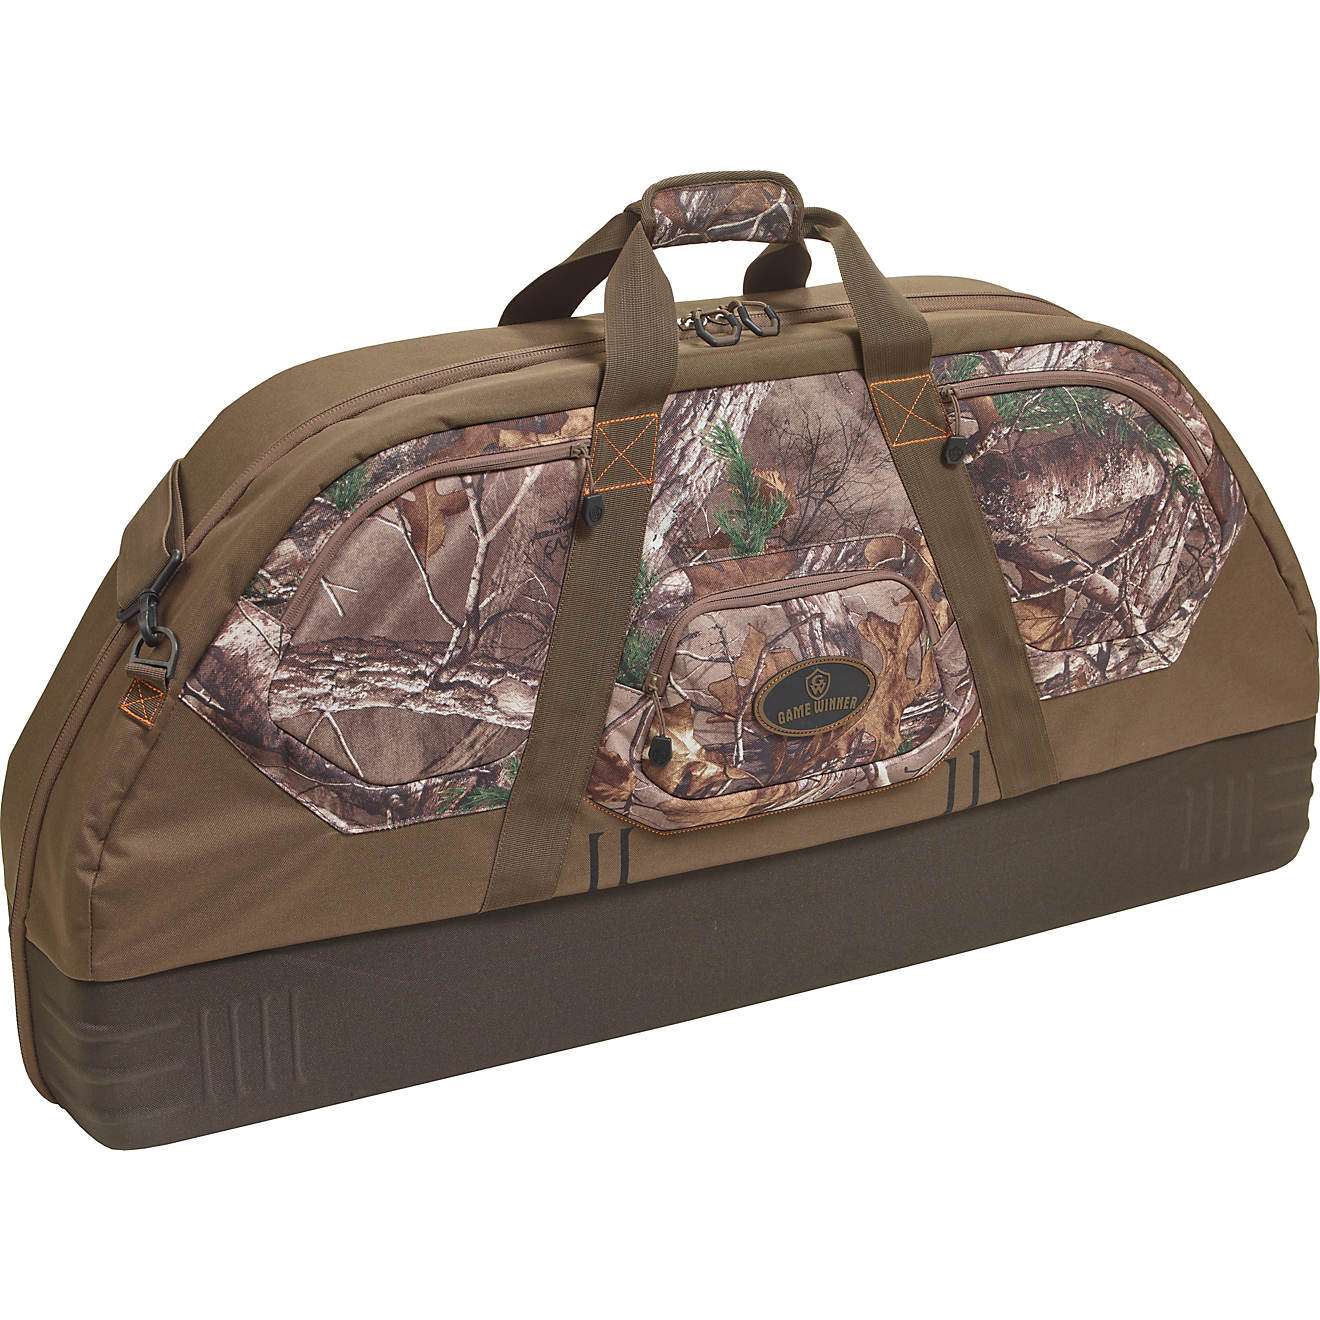 <p><strong>Game Winner DLX Bow Case</strong><br> A compound bow has plenty of moving parts, so naturally keeping your bow safe is extremely important. The Game Winner DLX Bow Case is a protective case that features plenty of storage for extra accessories. <a href=